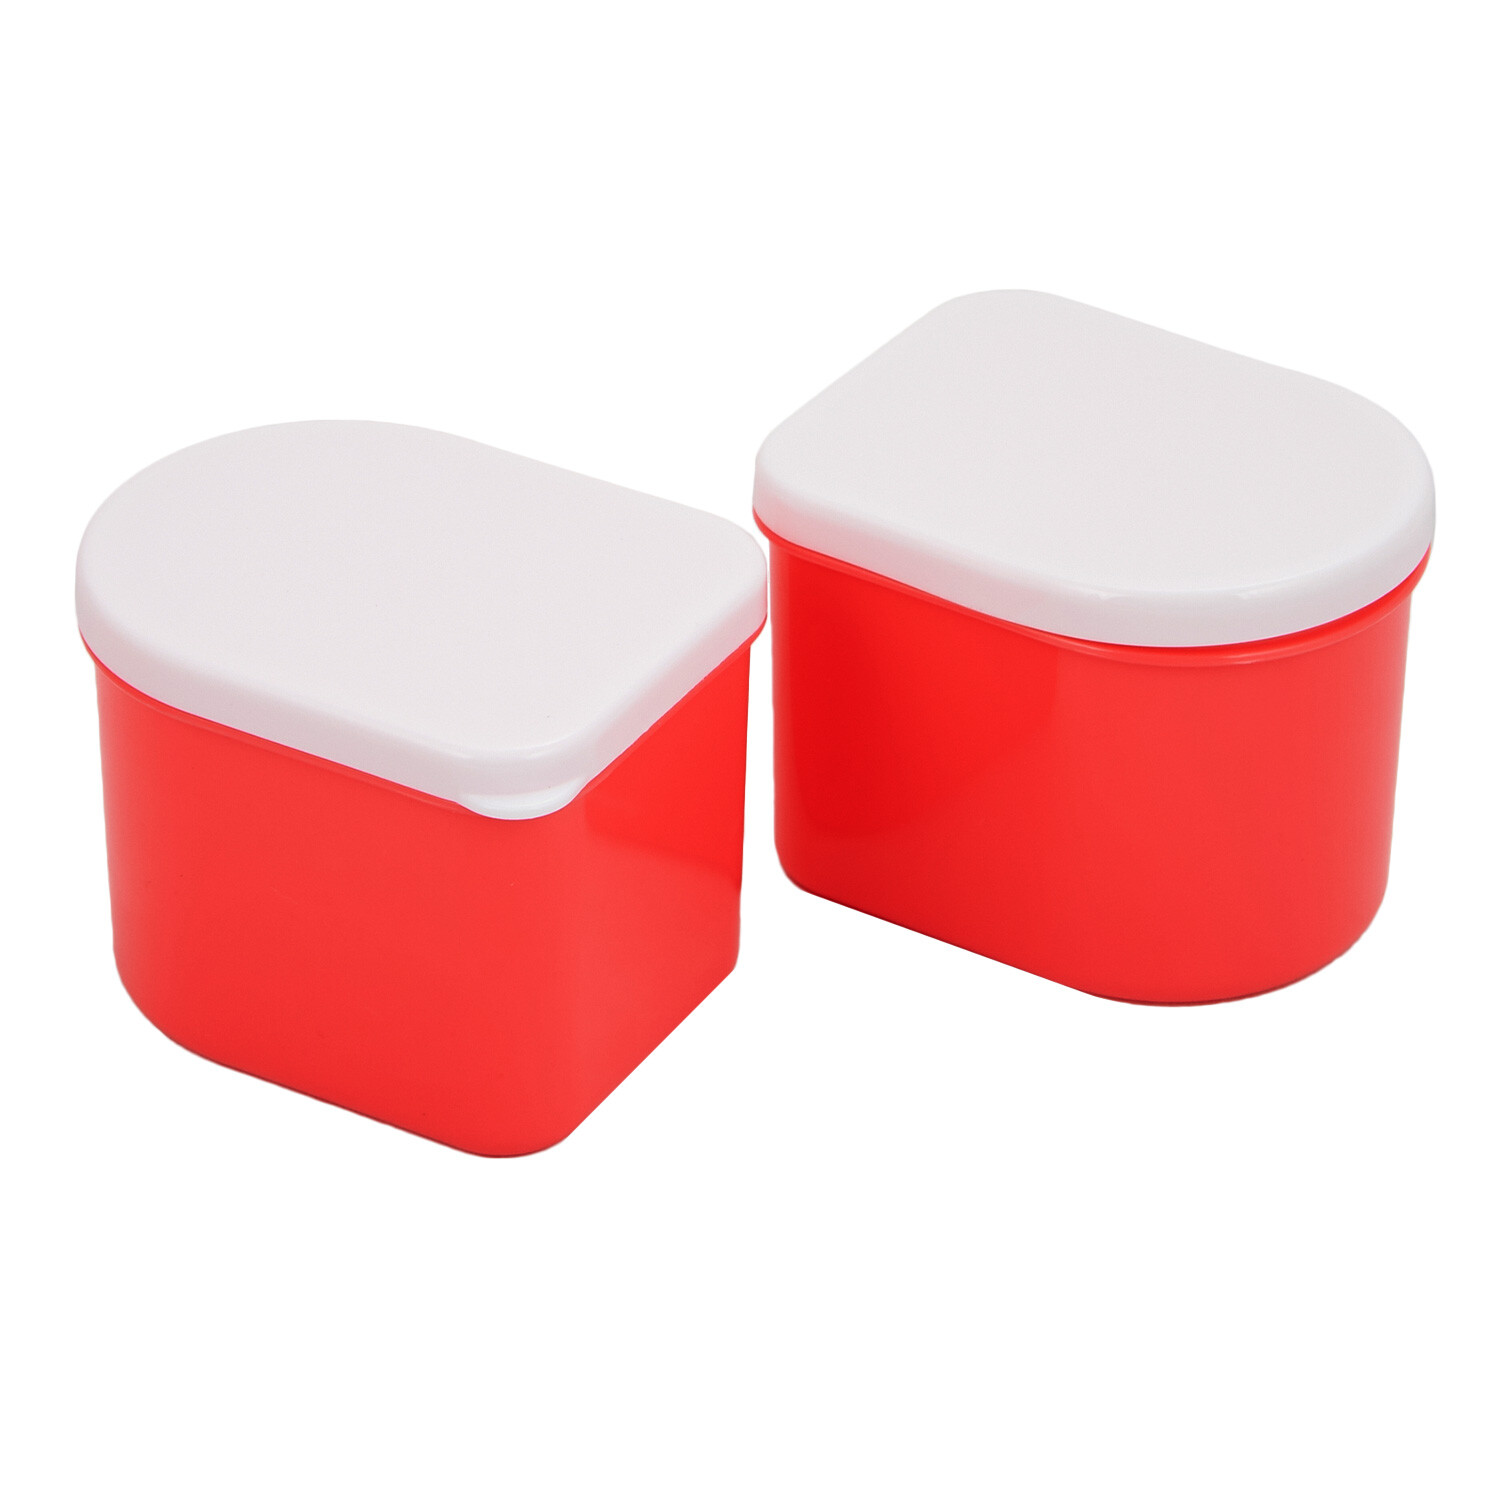 Triple Compartment Lunch Box - Red Image 4